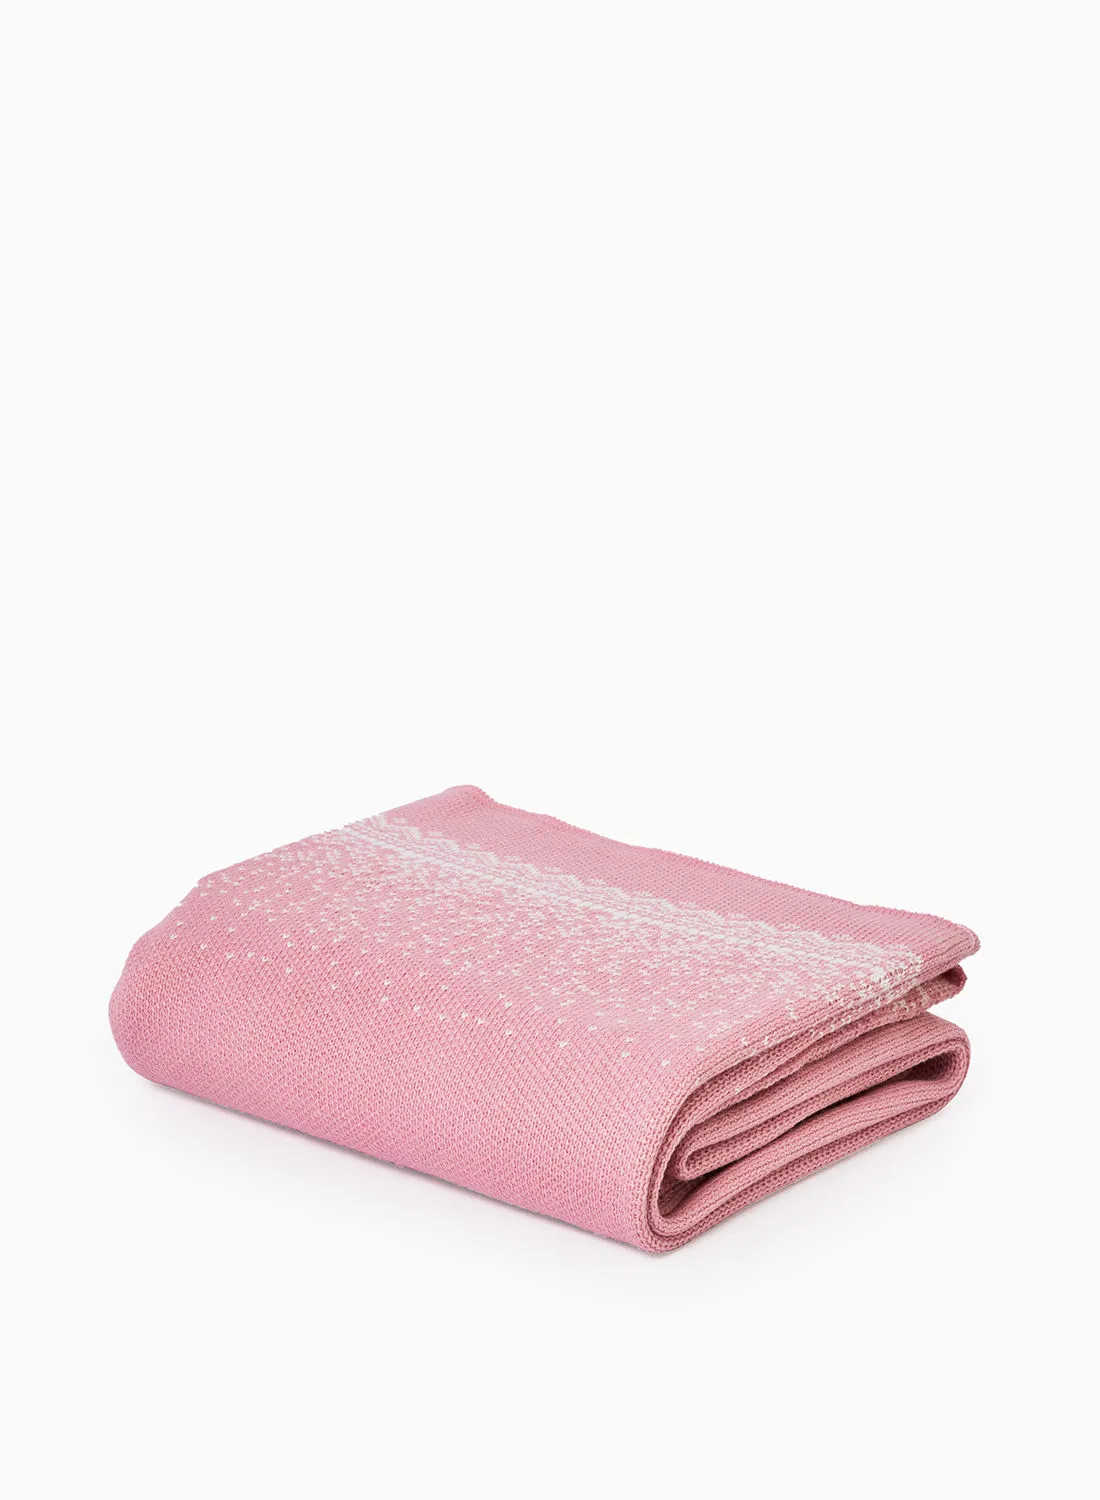 Noon East Lightweight Summer Blanket Single Size 430 GSM Soft Knitted All Season Blanket Bed And Sofa Throw 127x152 Cms Pink